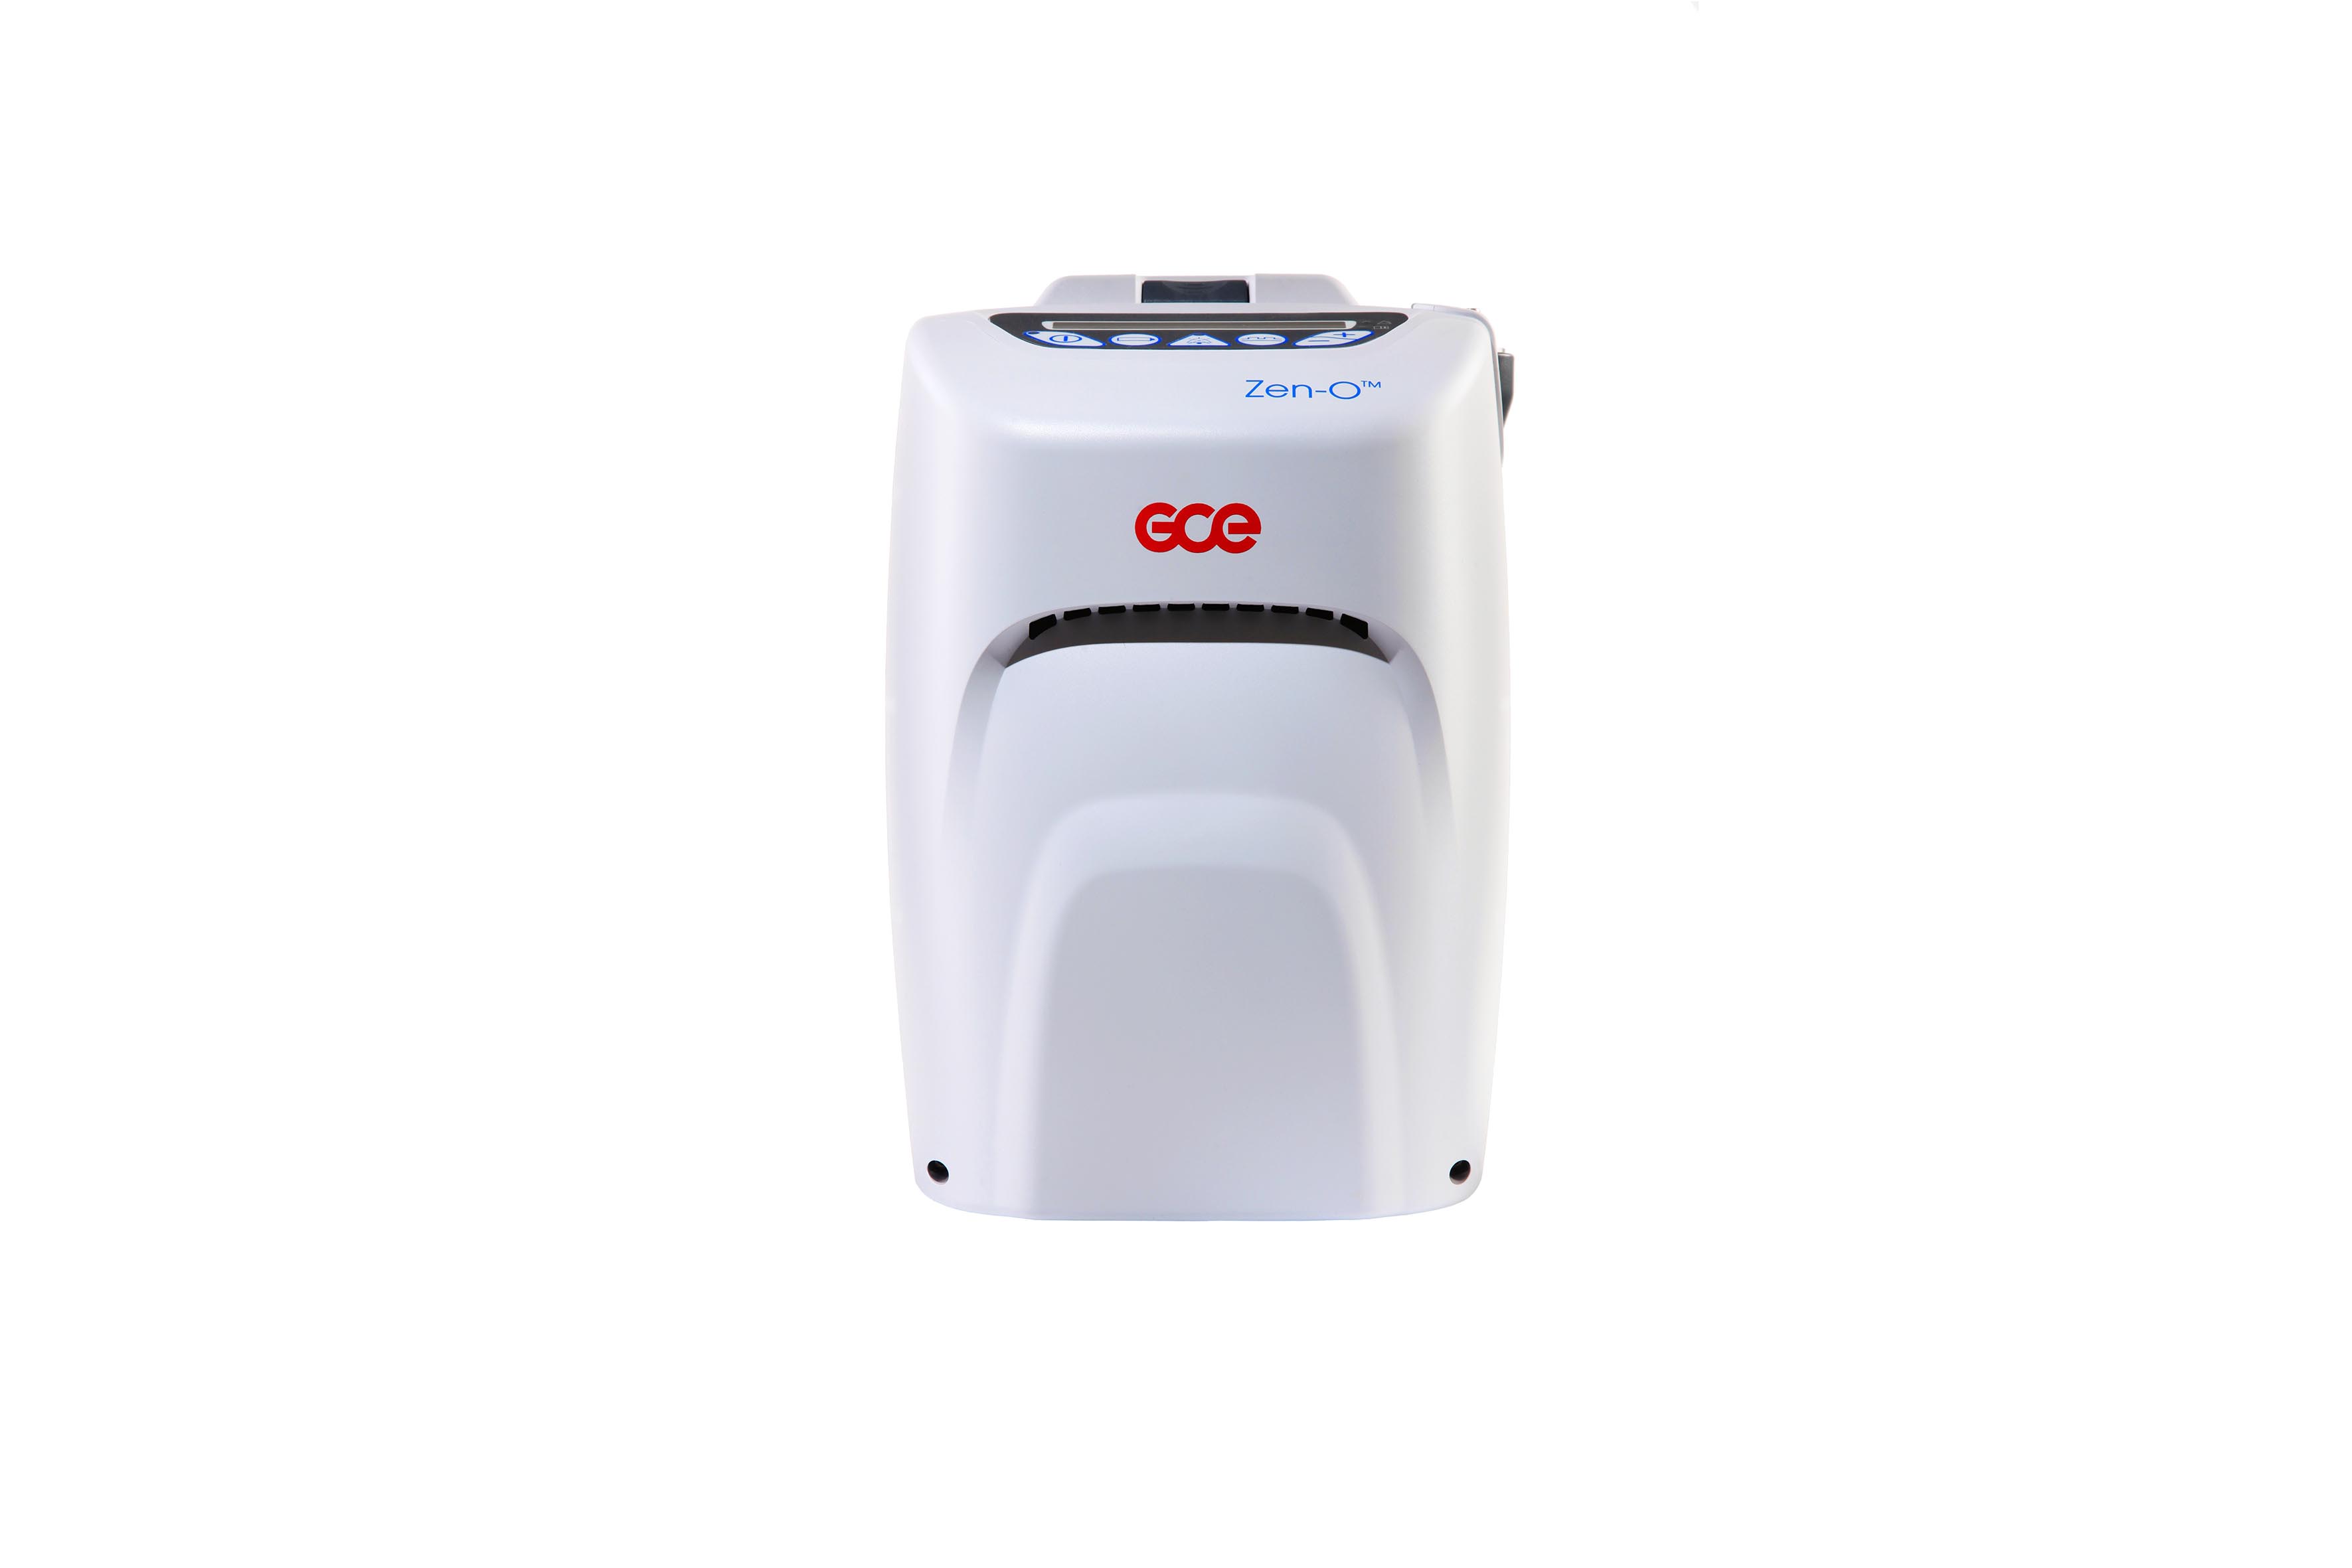 Photo of the Zen-O Portable Oxygen Concentrator on white background.